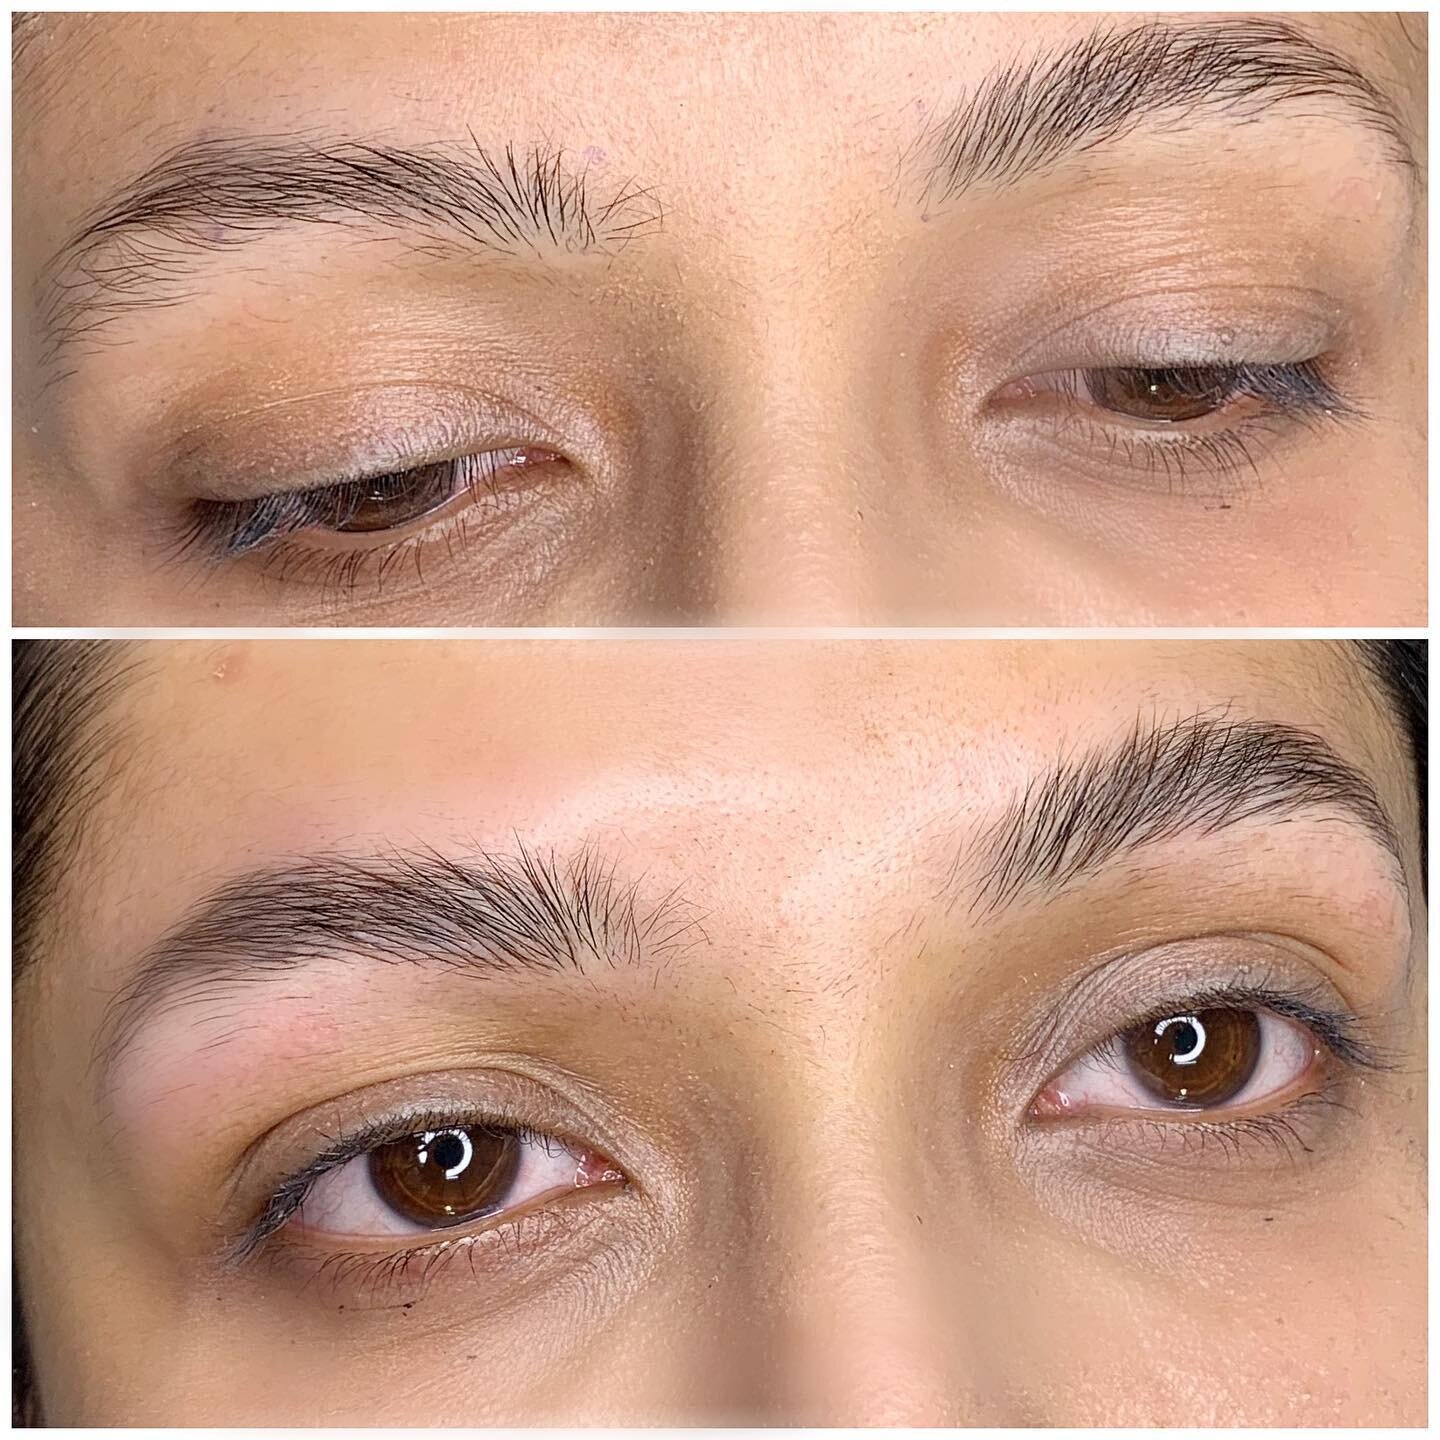 ~ minimal ~ 

Our signature microblading giving a major natural glow up on these brows. 

Ready to start your brow journey? 

Drop us an email 👇🏻👇🏻👇🏻

💌sydneystudio@kohlbeauty.com

#microblading #microbladedbrows #eyebrowtutorial #eyebrowtatto